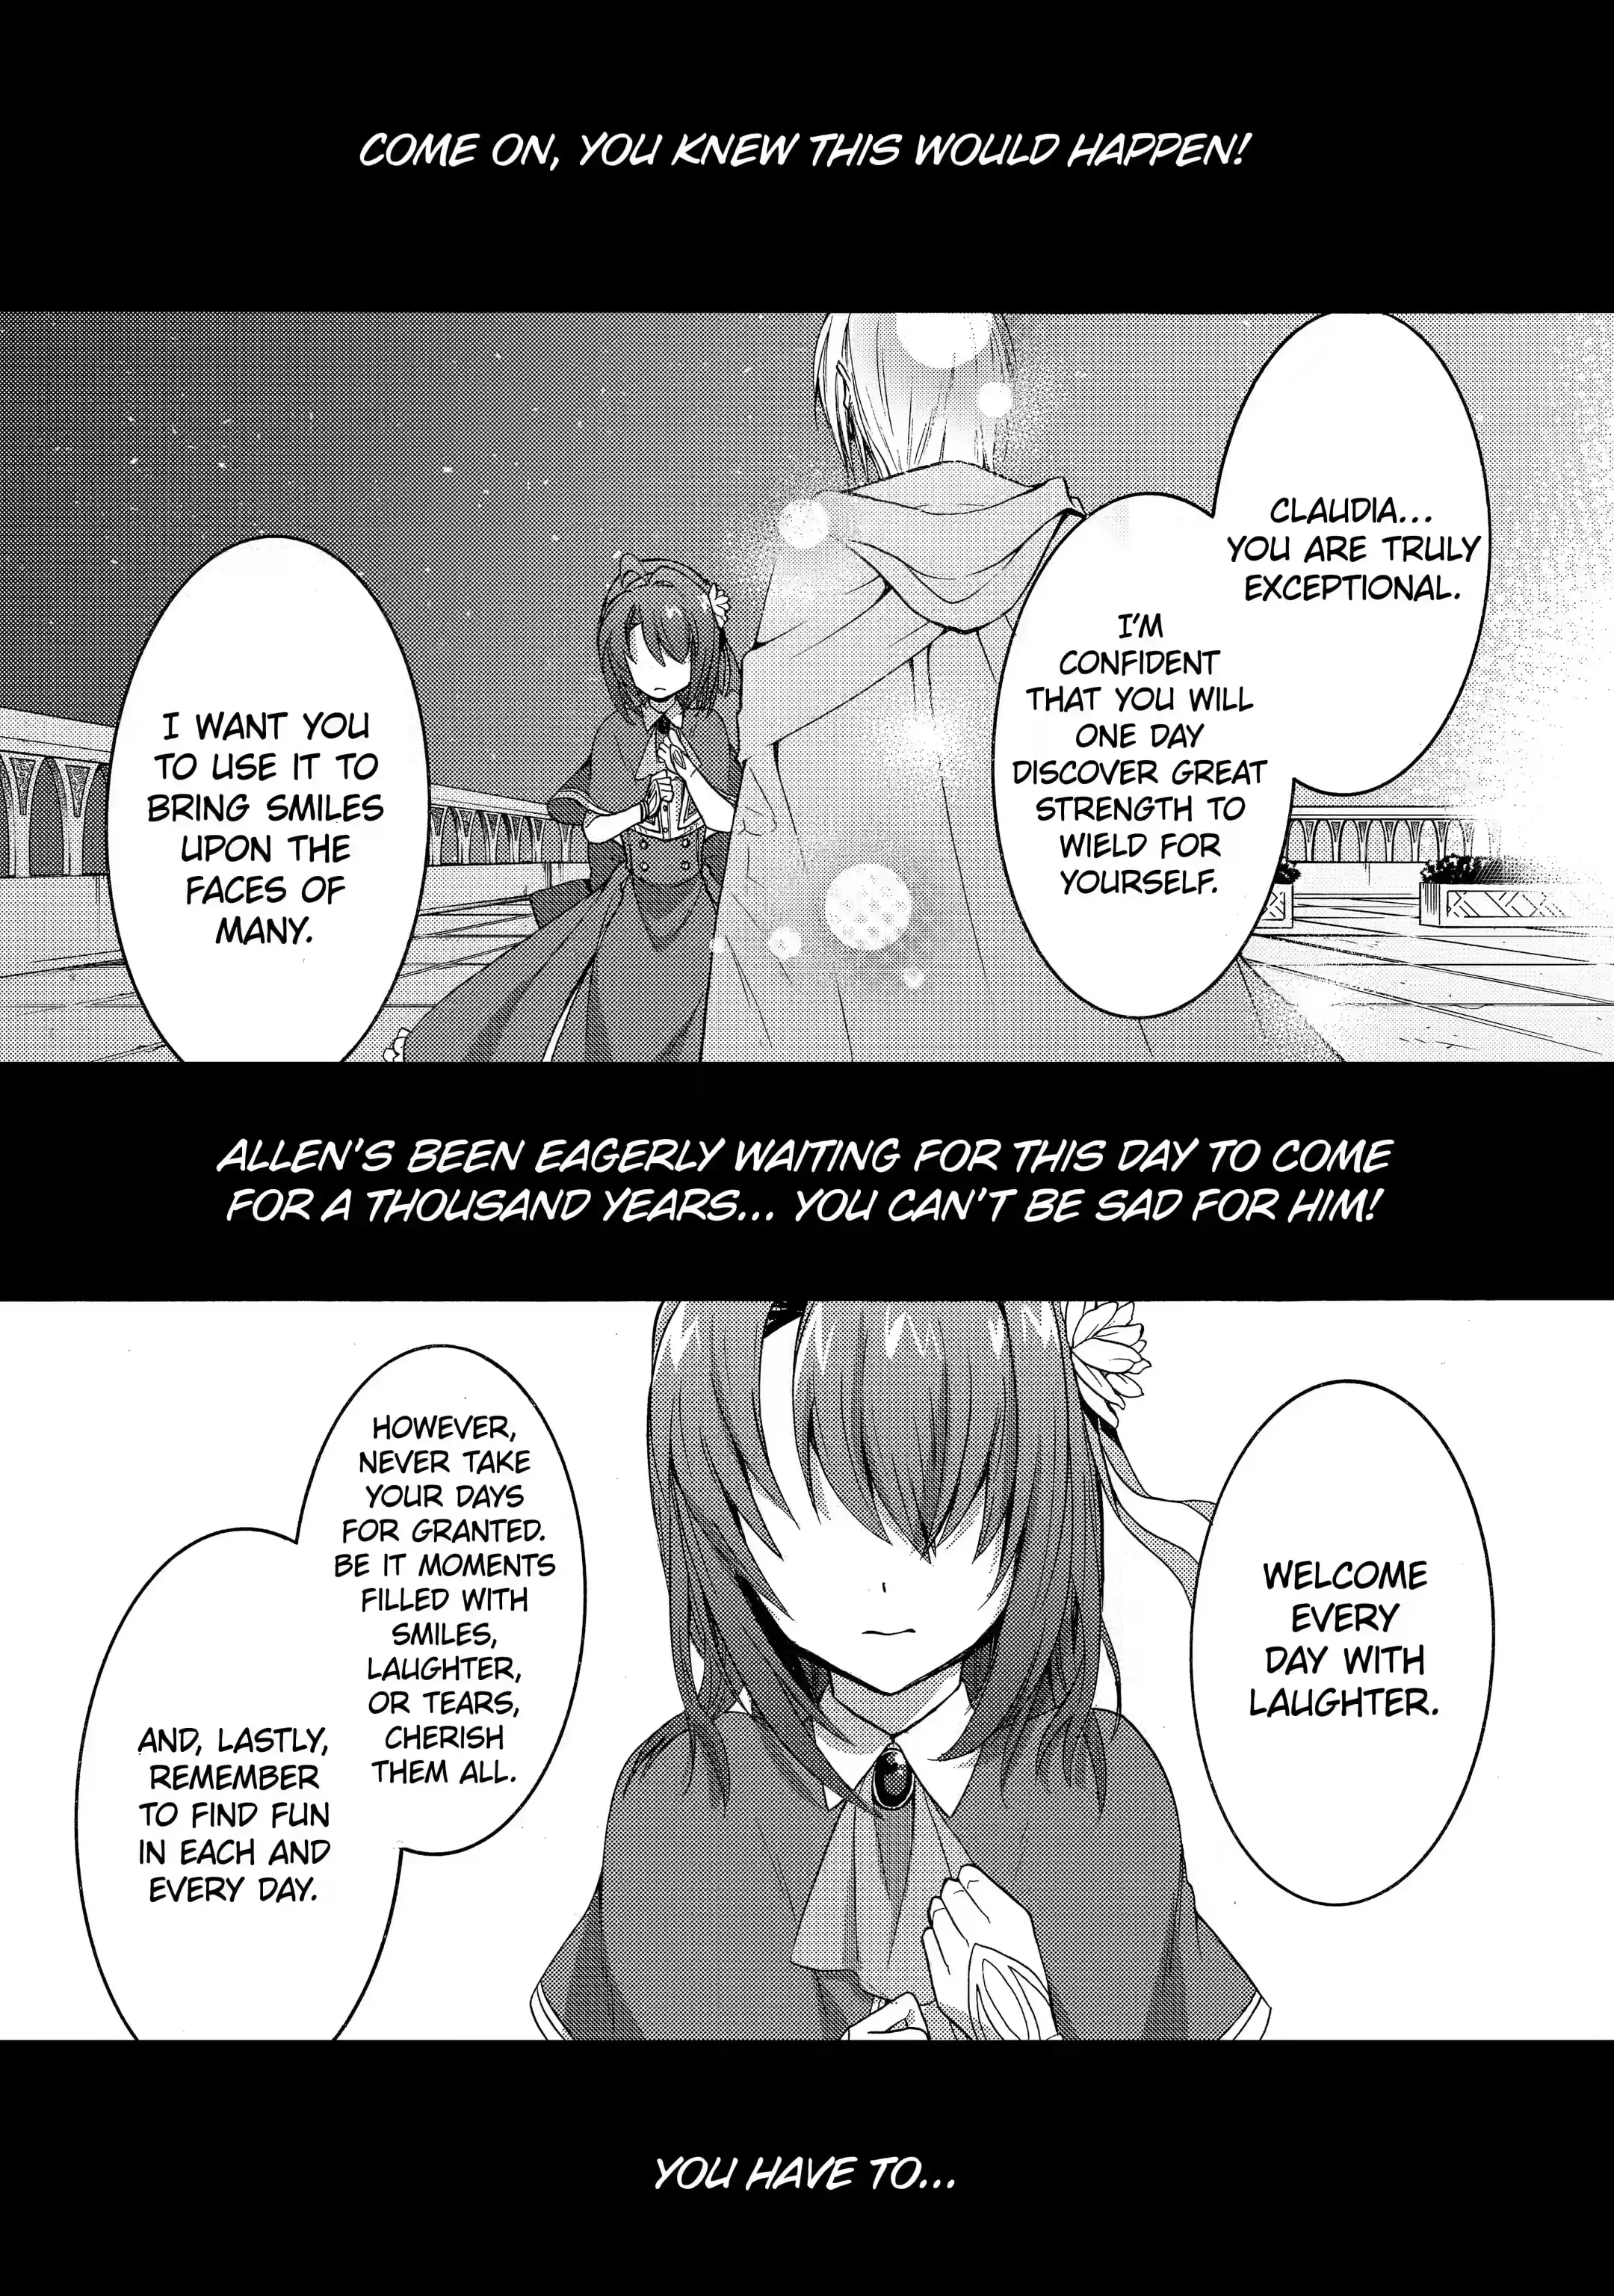 How to Survive a Thousand Deaths: Accidentally Wooing Everyone as an Ex-gamer Made Villainess! - chapter 13.2 - #6